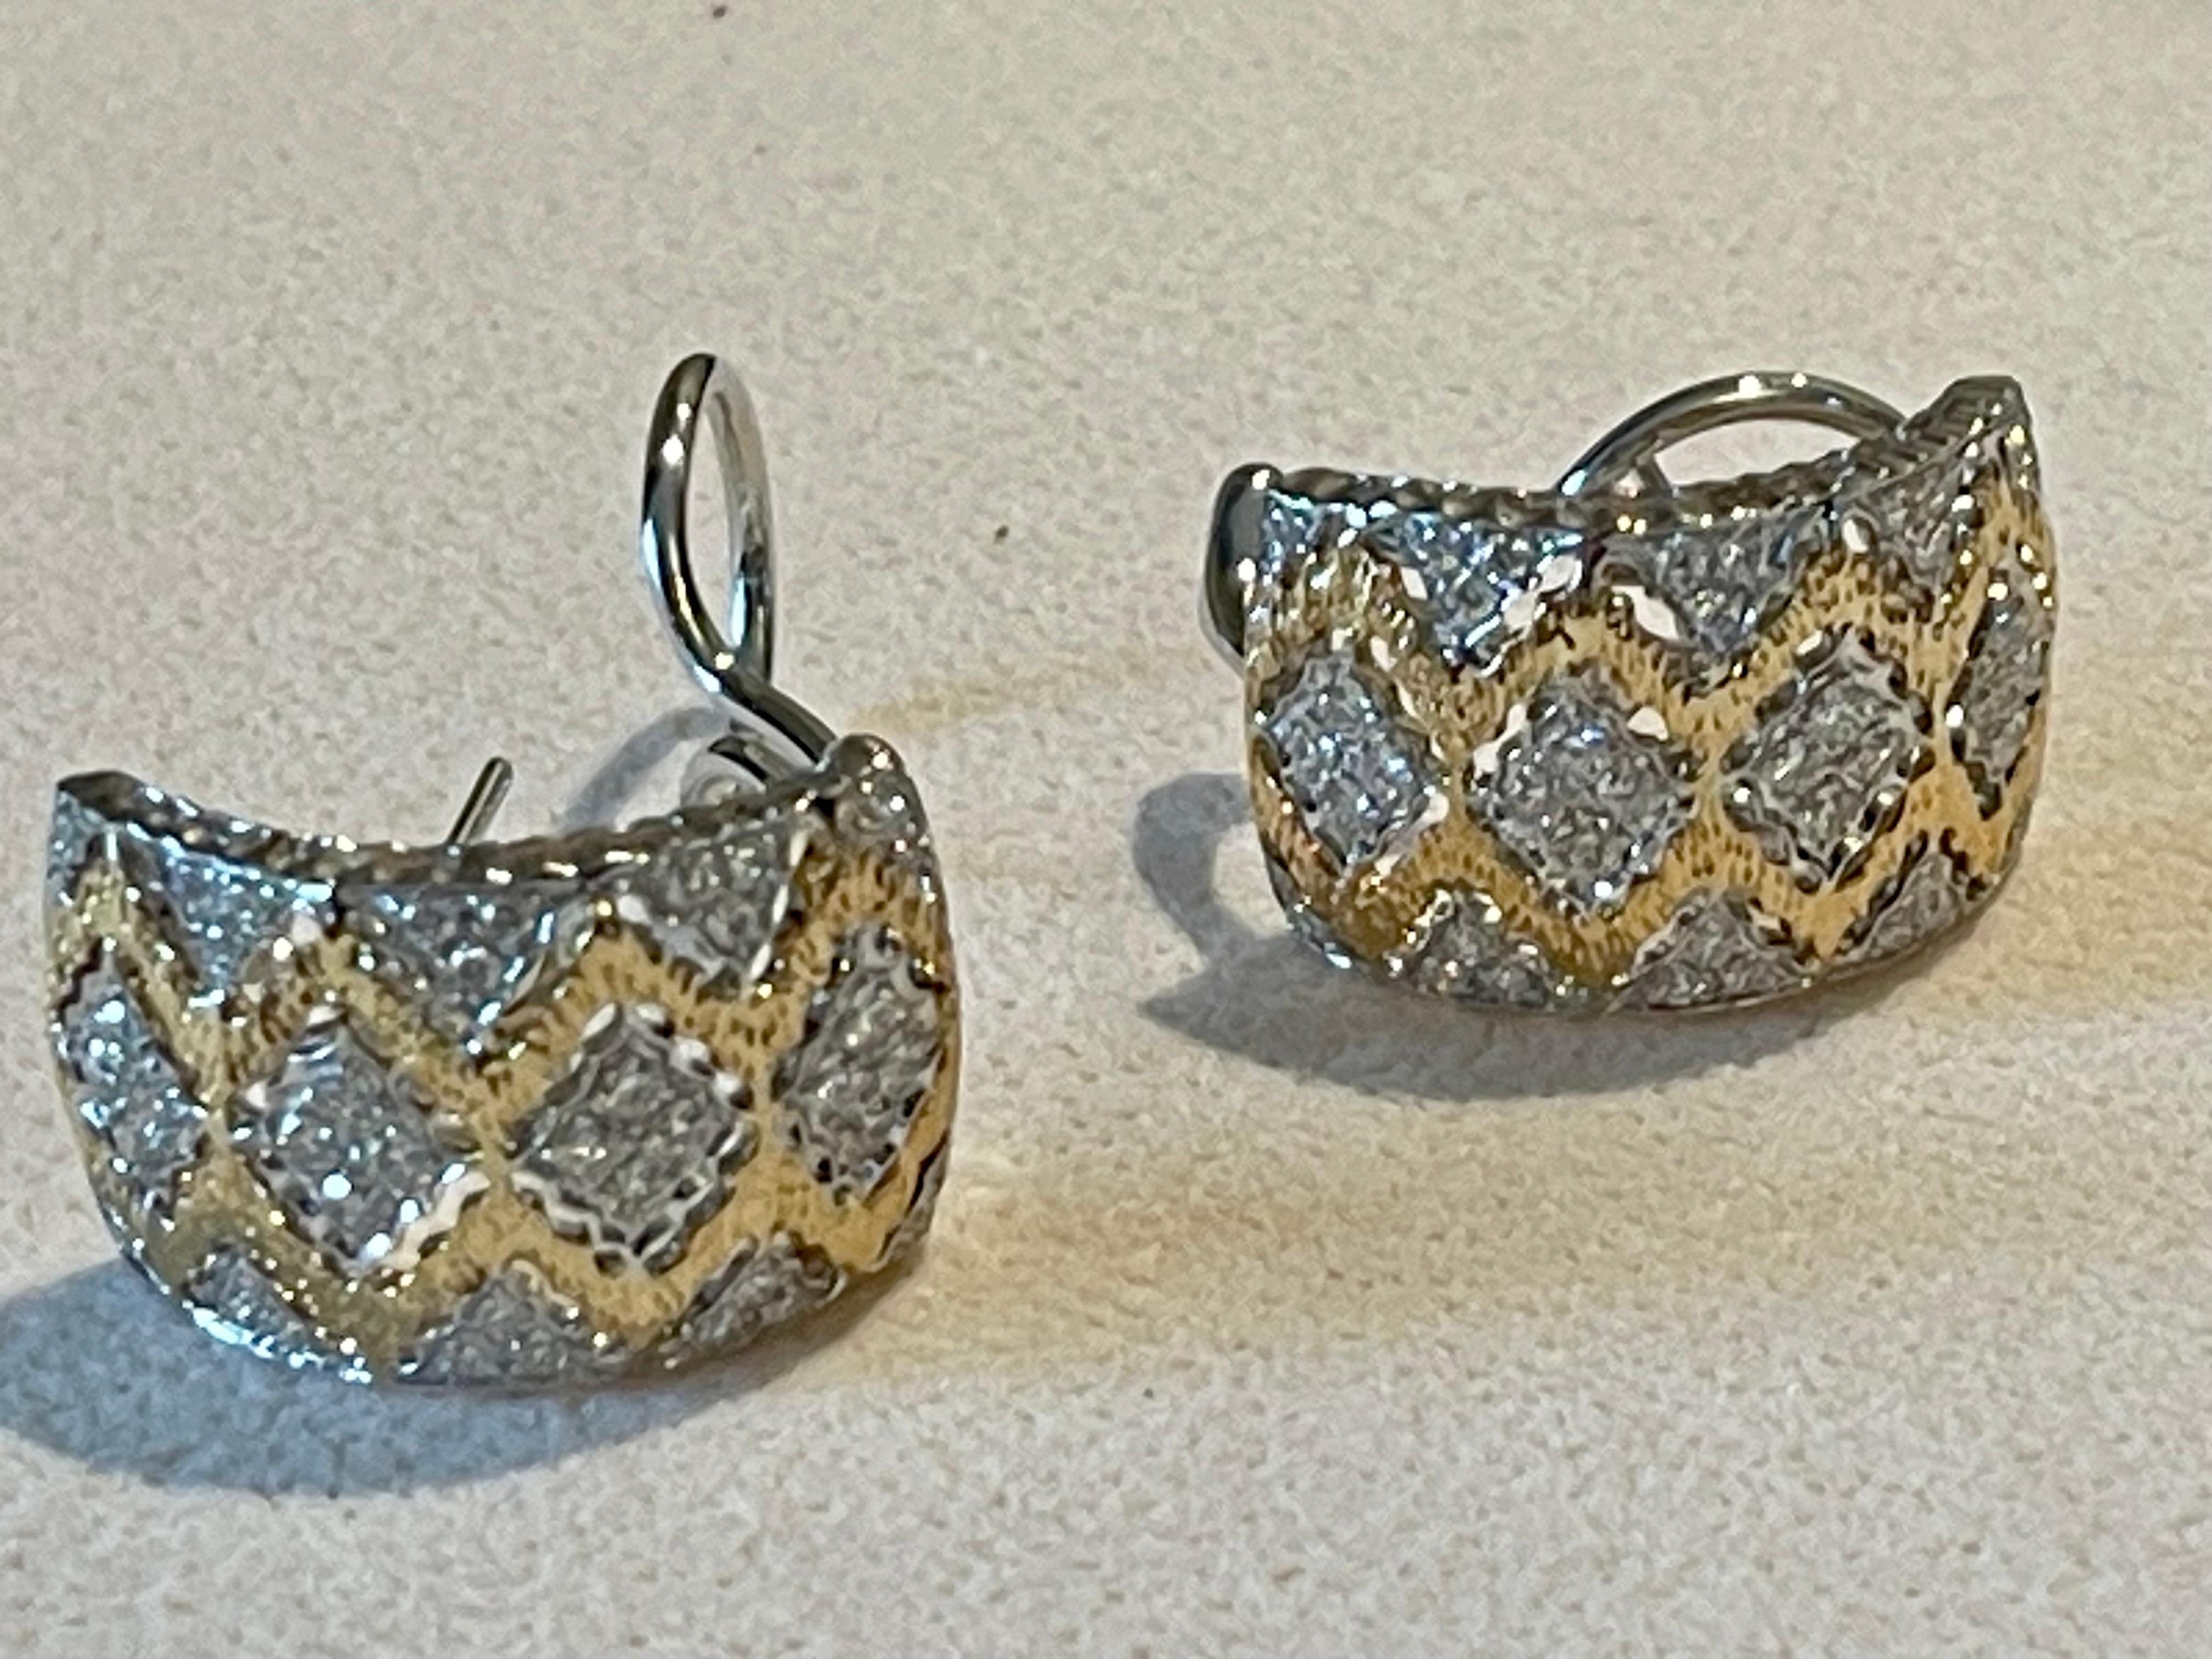 A pair of two-tone 18 K yellow Gold and 18 K white Gold  Huggies earrings featuring lovely openwork filigree between the diamond-shaped gold sections.
Each section features a brilliant-cut diamond in the center. The yellow gold along the sides